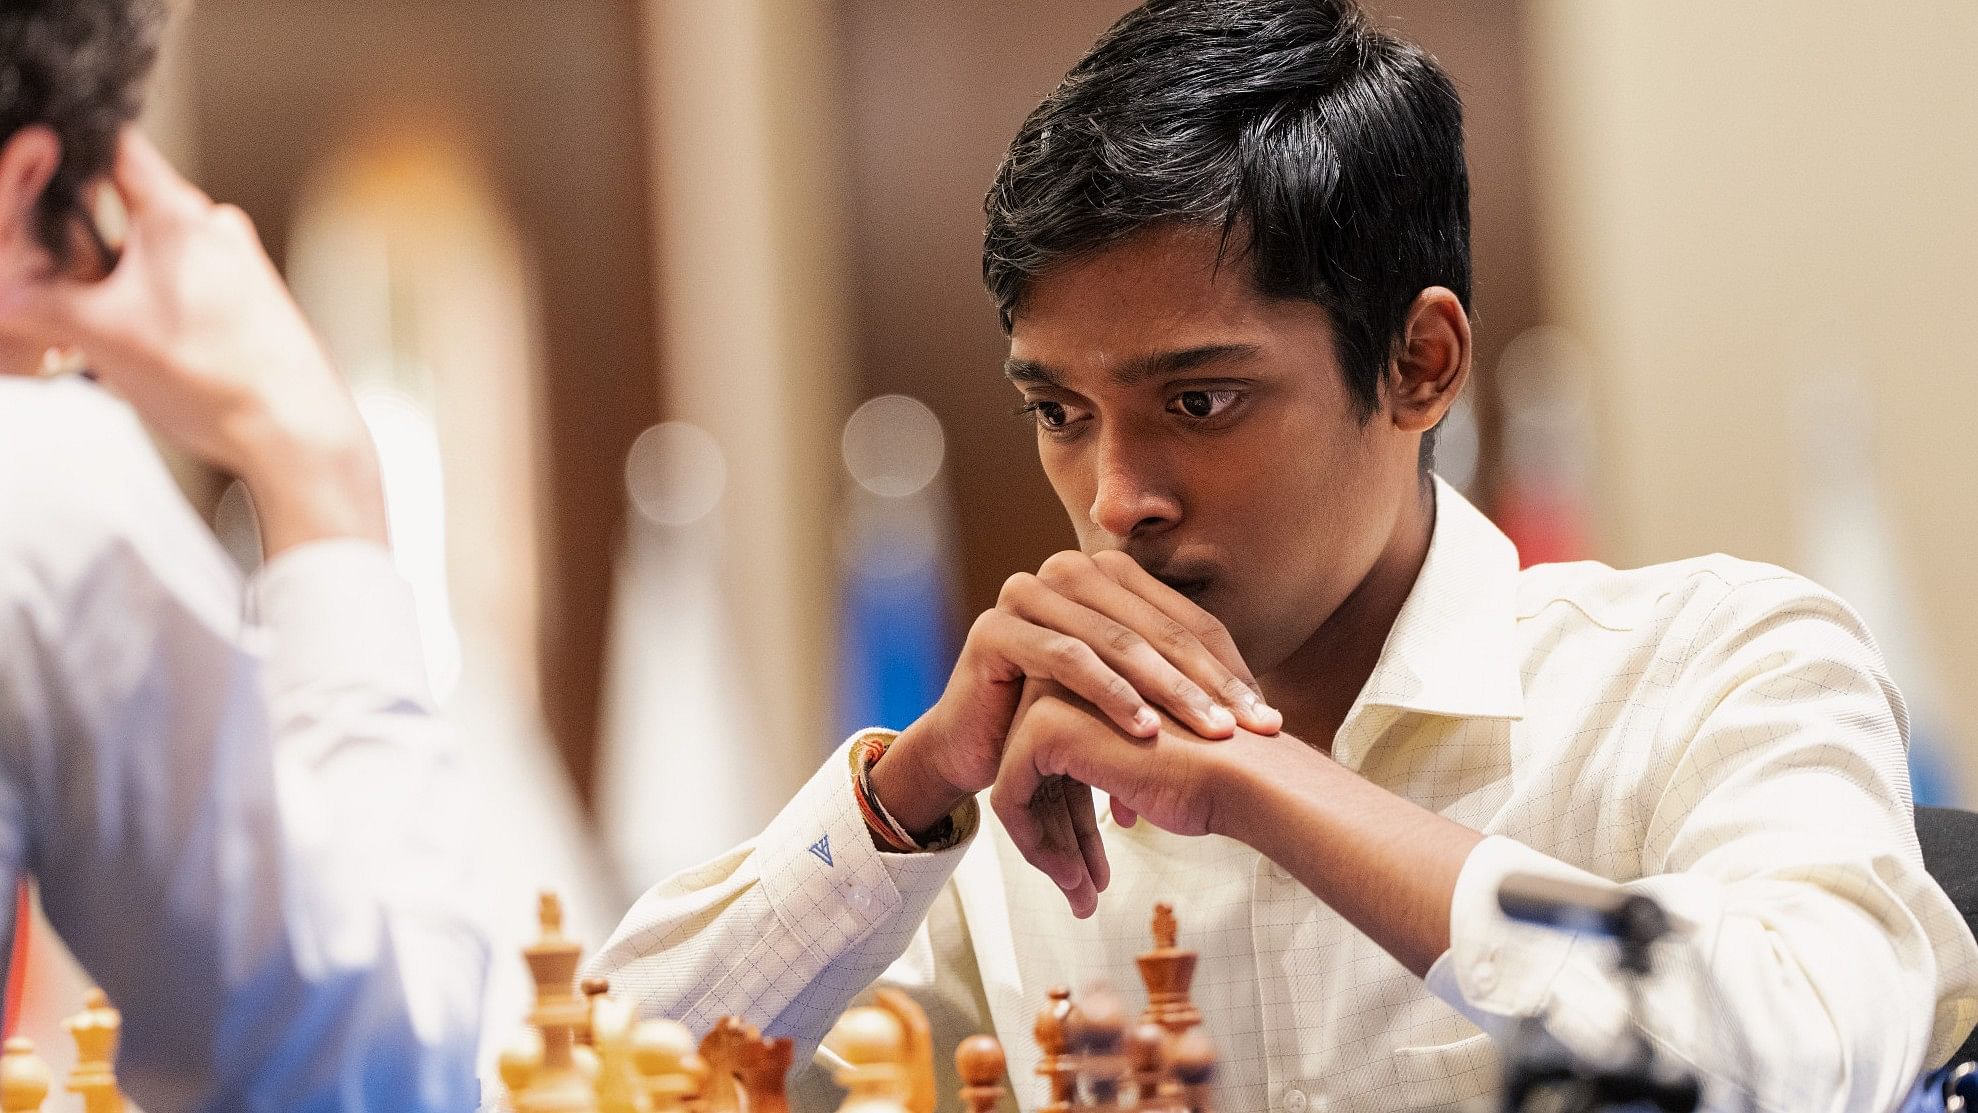 Here's How Much Rameshbabu Praggnanandhaa Won for His Runner-up Finish at  the 2023 FIDE Chess World Cup